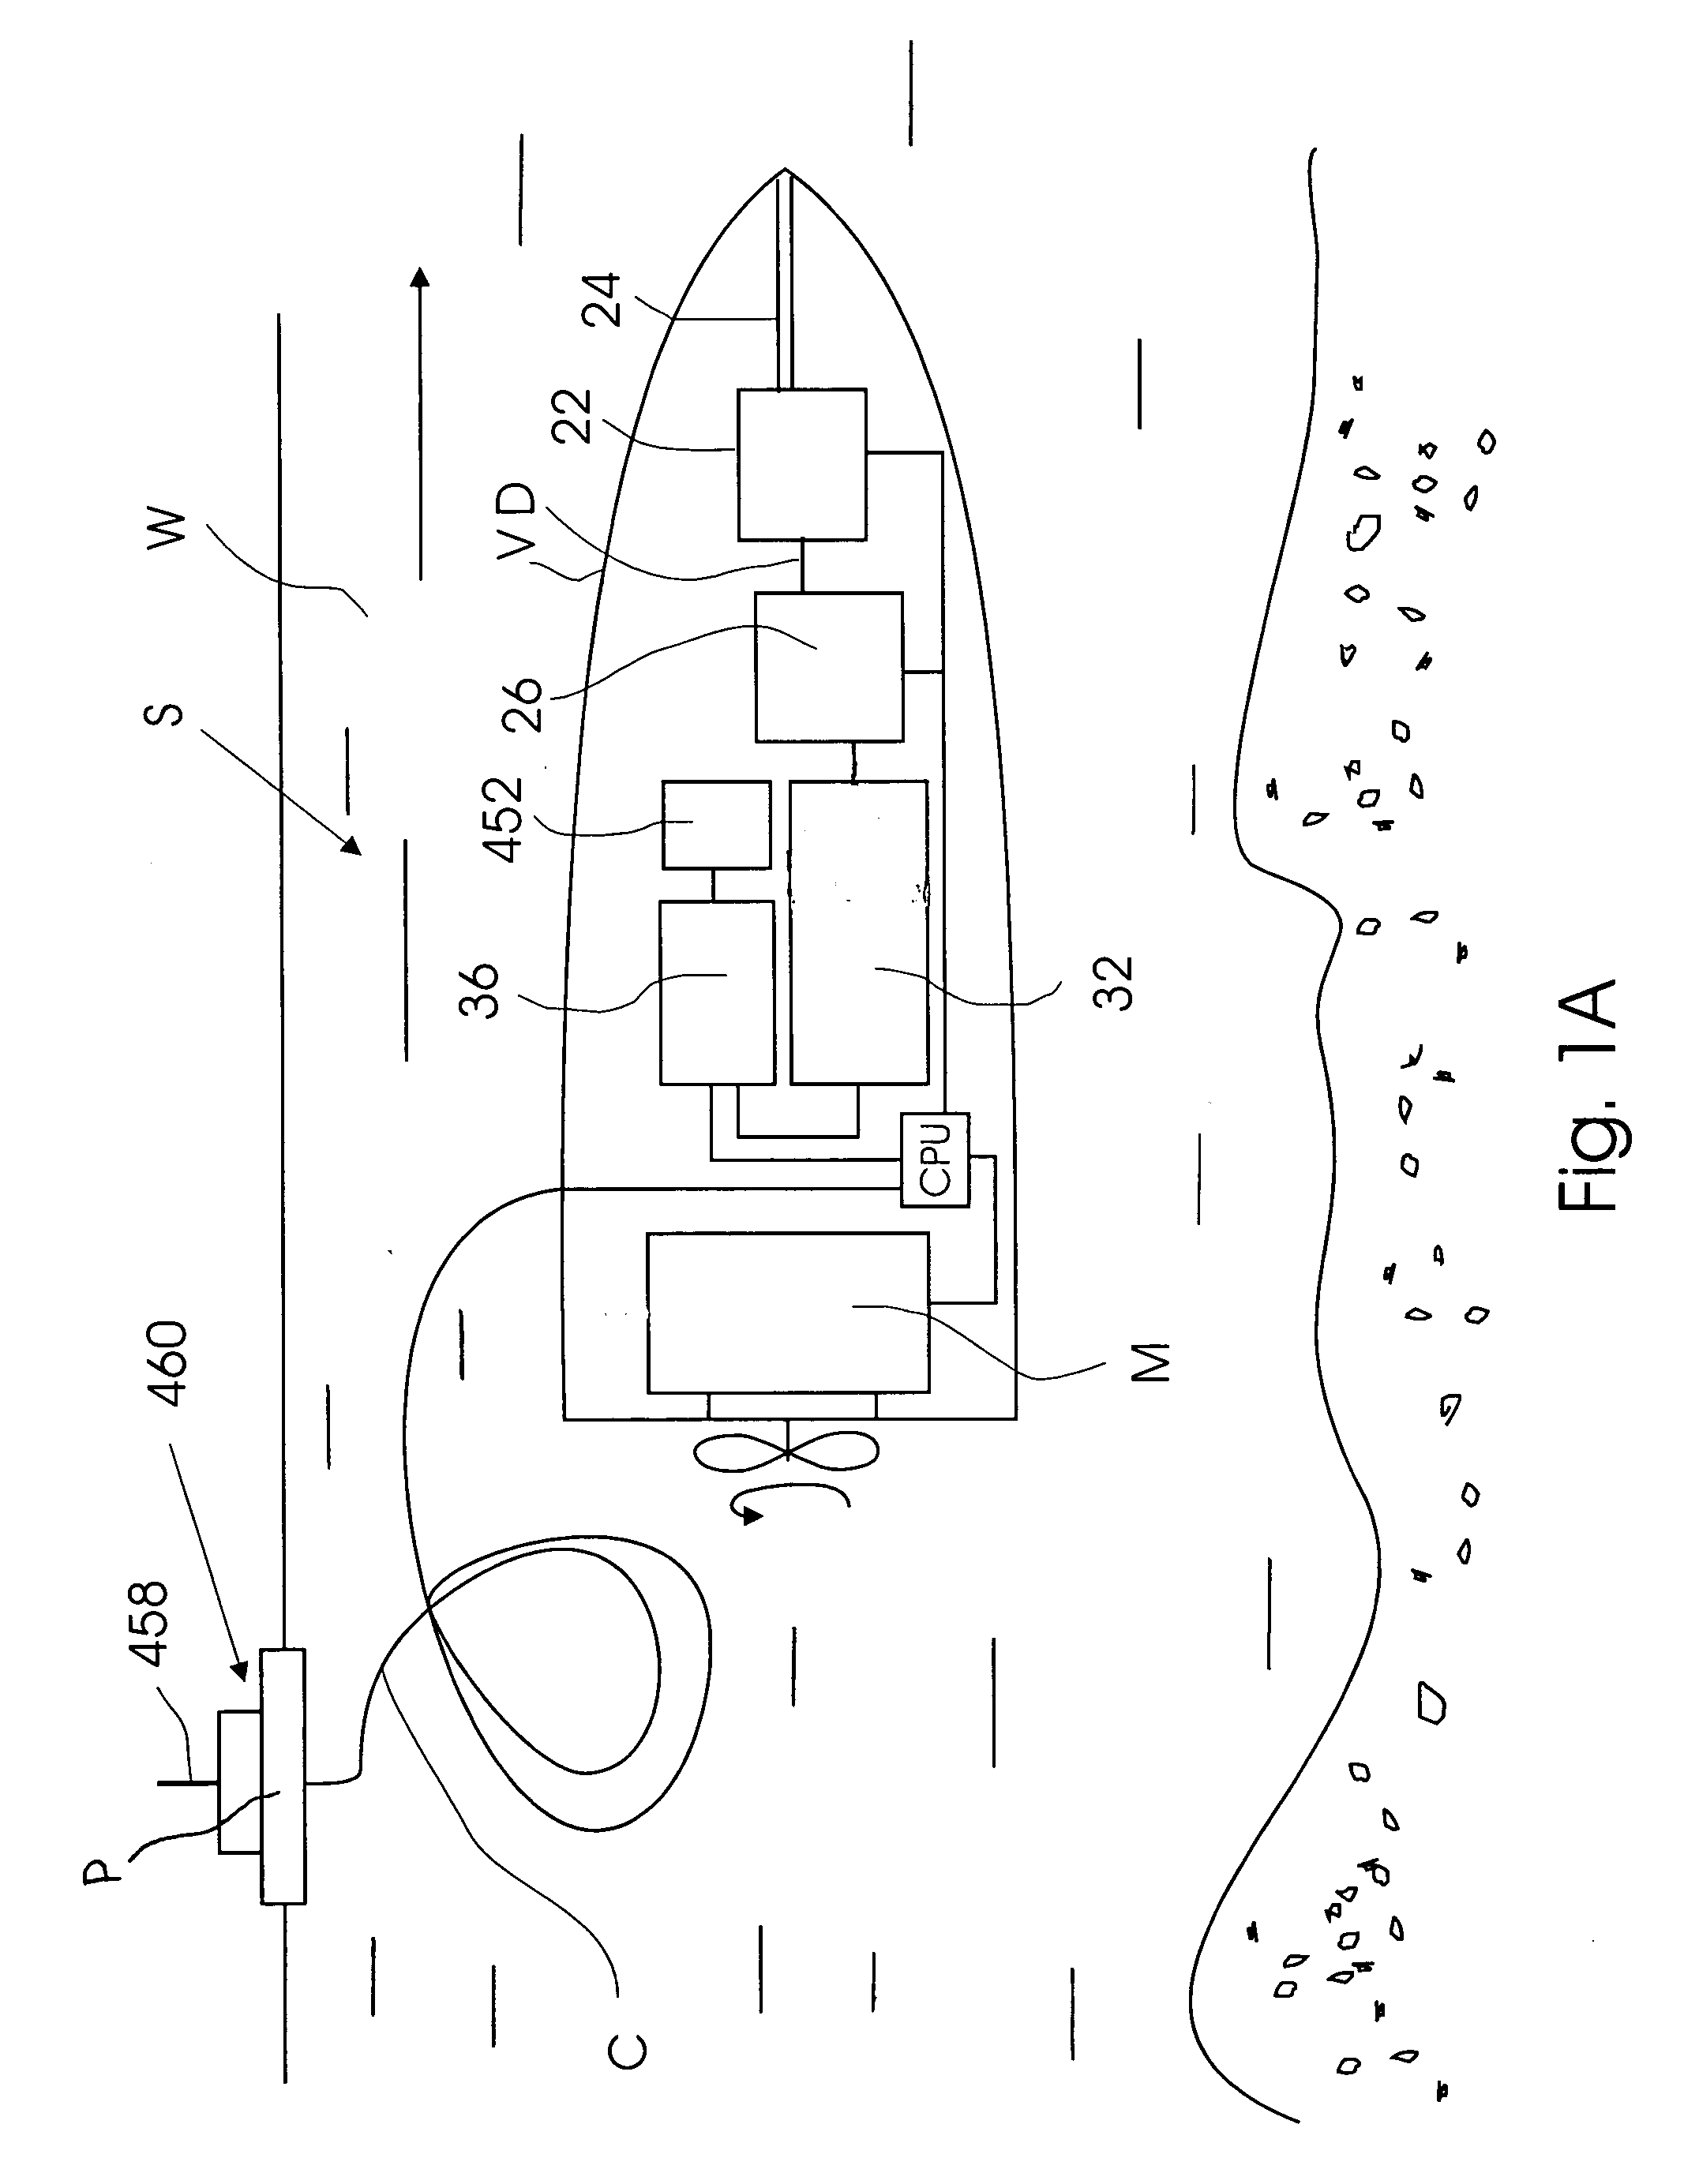 Mass spectrometry system for continuous control of environment